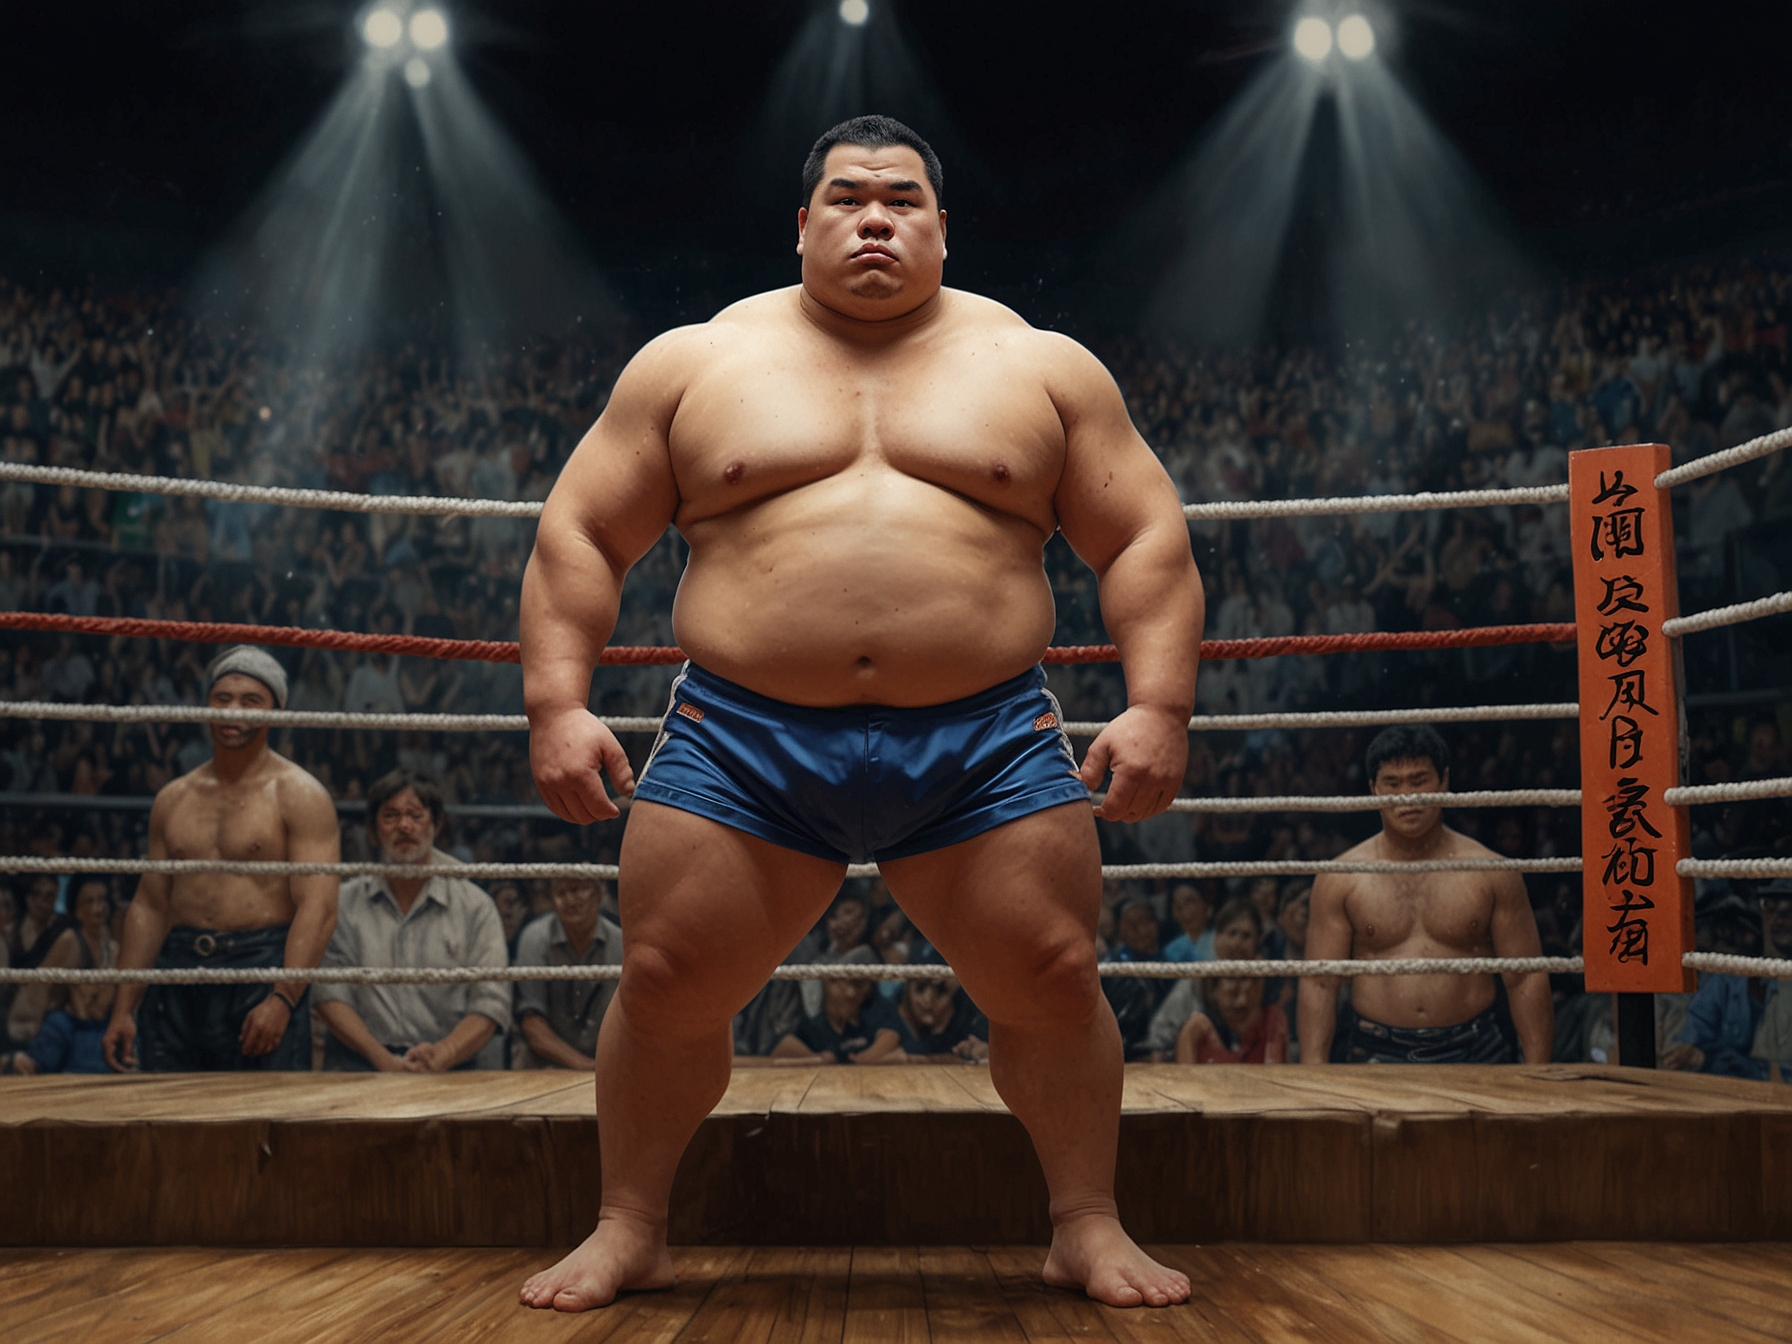 A memorial image of Taylor Wily juxtaposed with his sumo wrestling days and his acting career, highlighting his unique journey and contributions to both sports and entertainment.